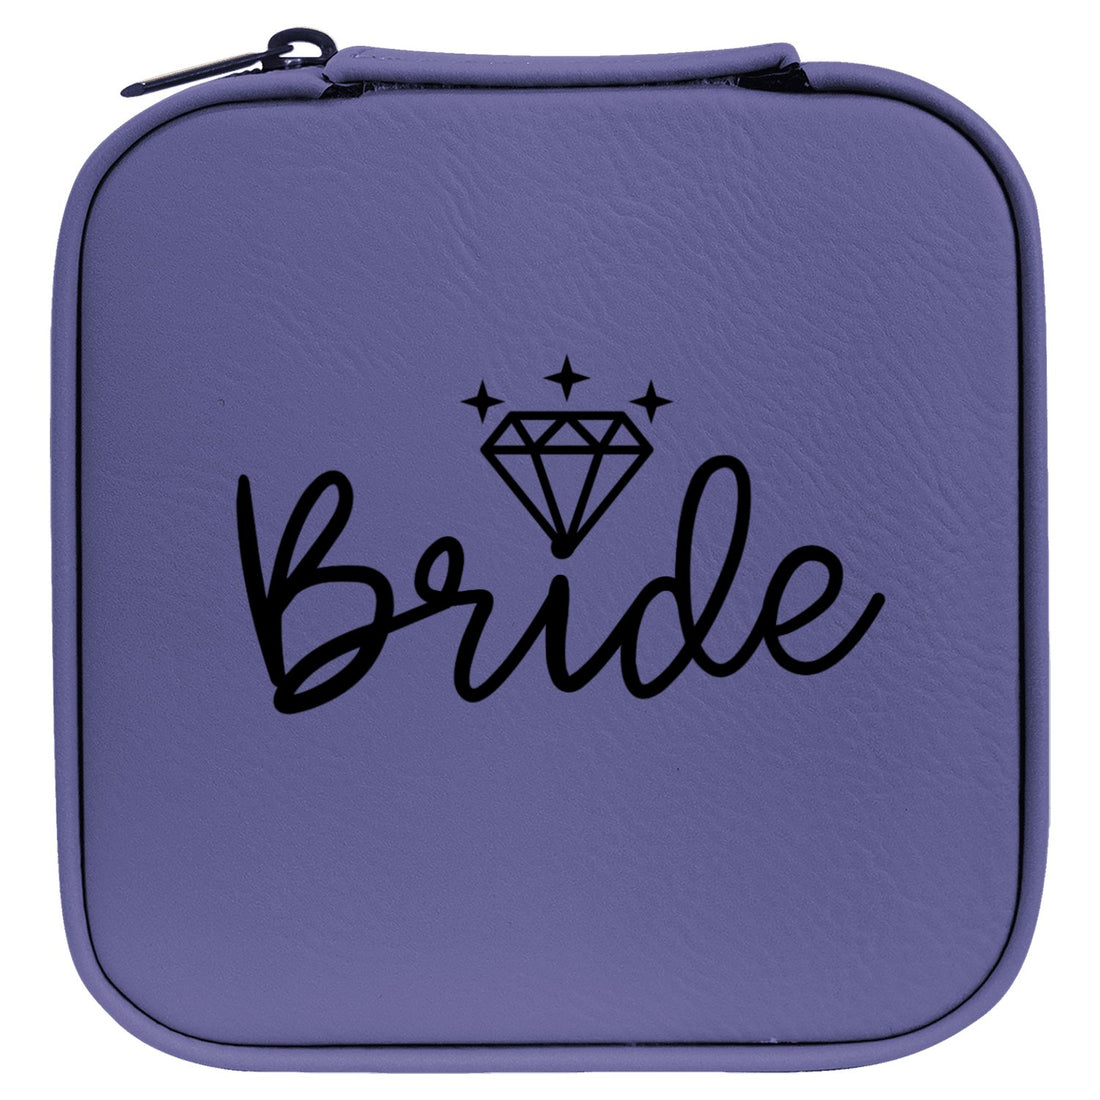 I Am The Bride Jewelry Organizer - Positively Sassy - I Am The Bride Jewelry Organizer